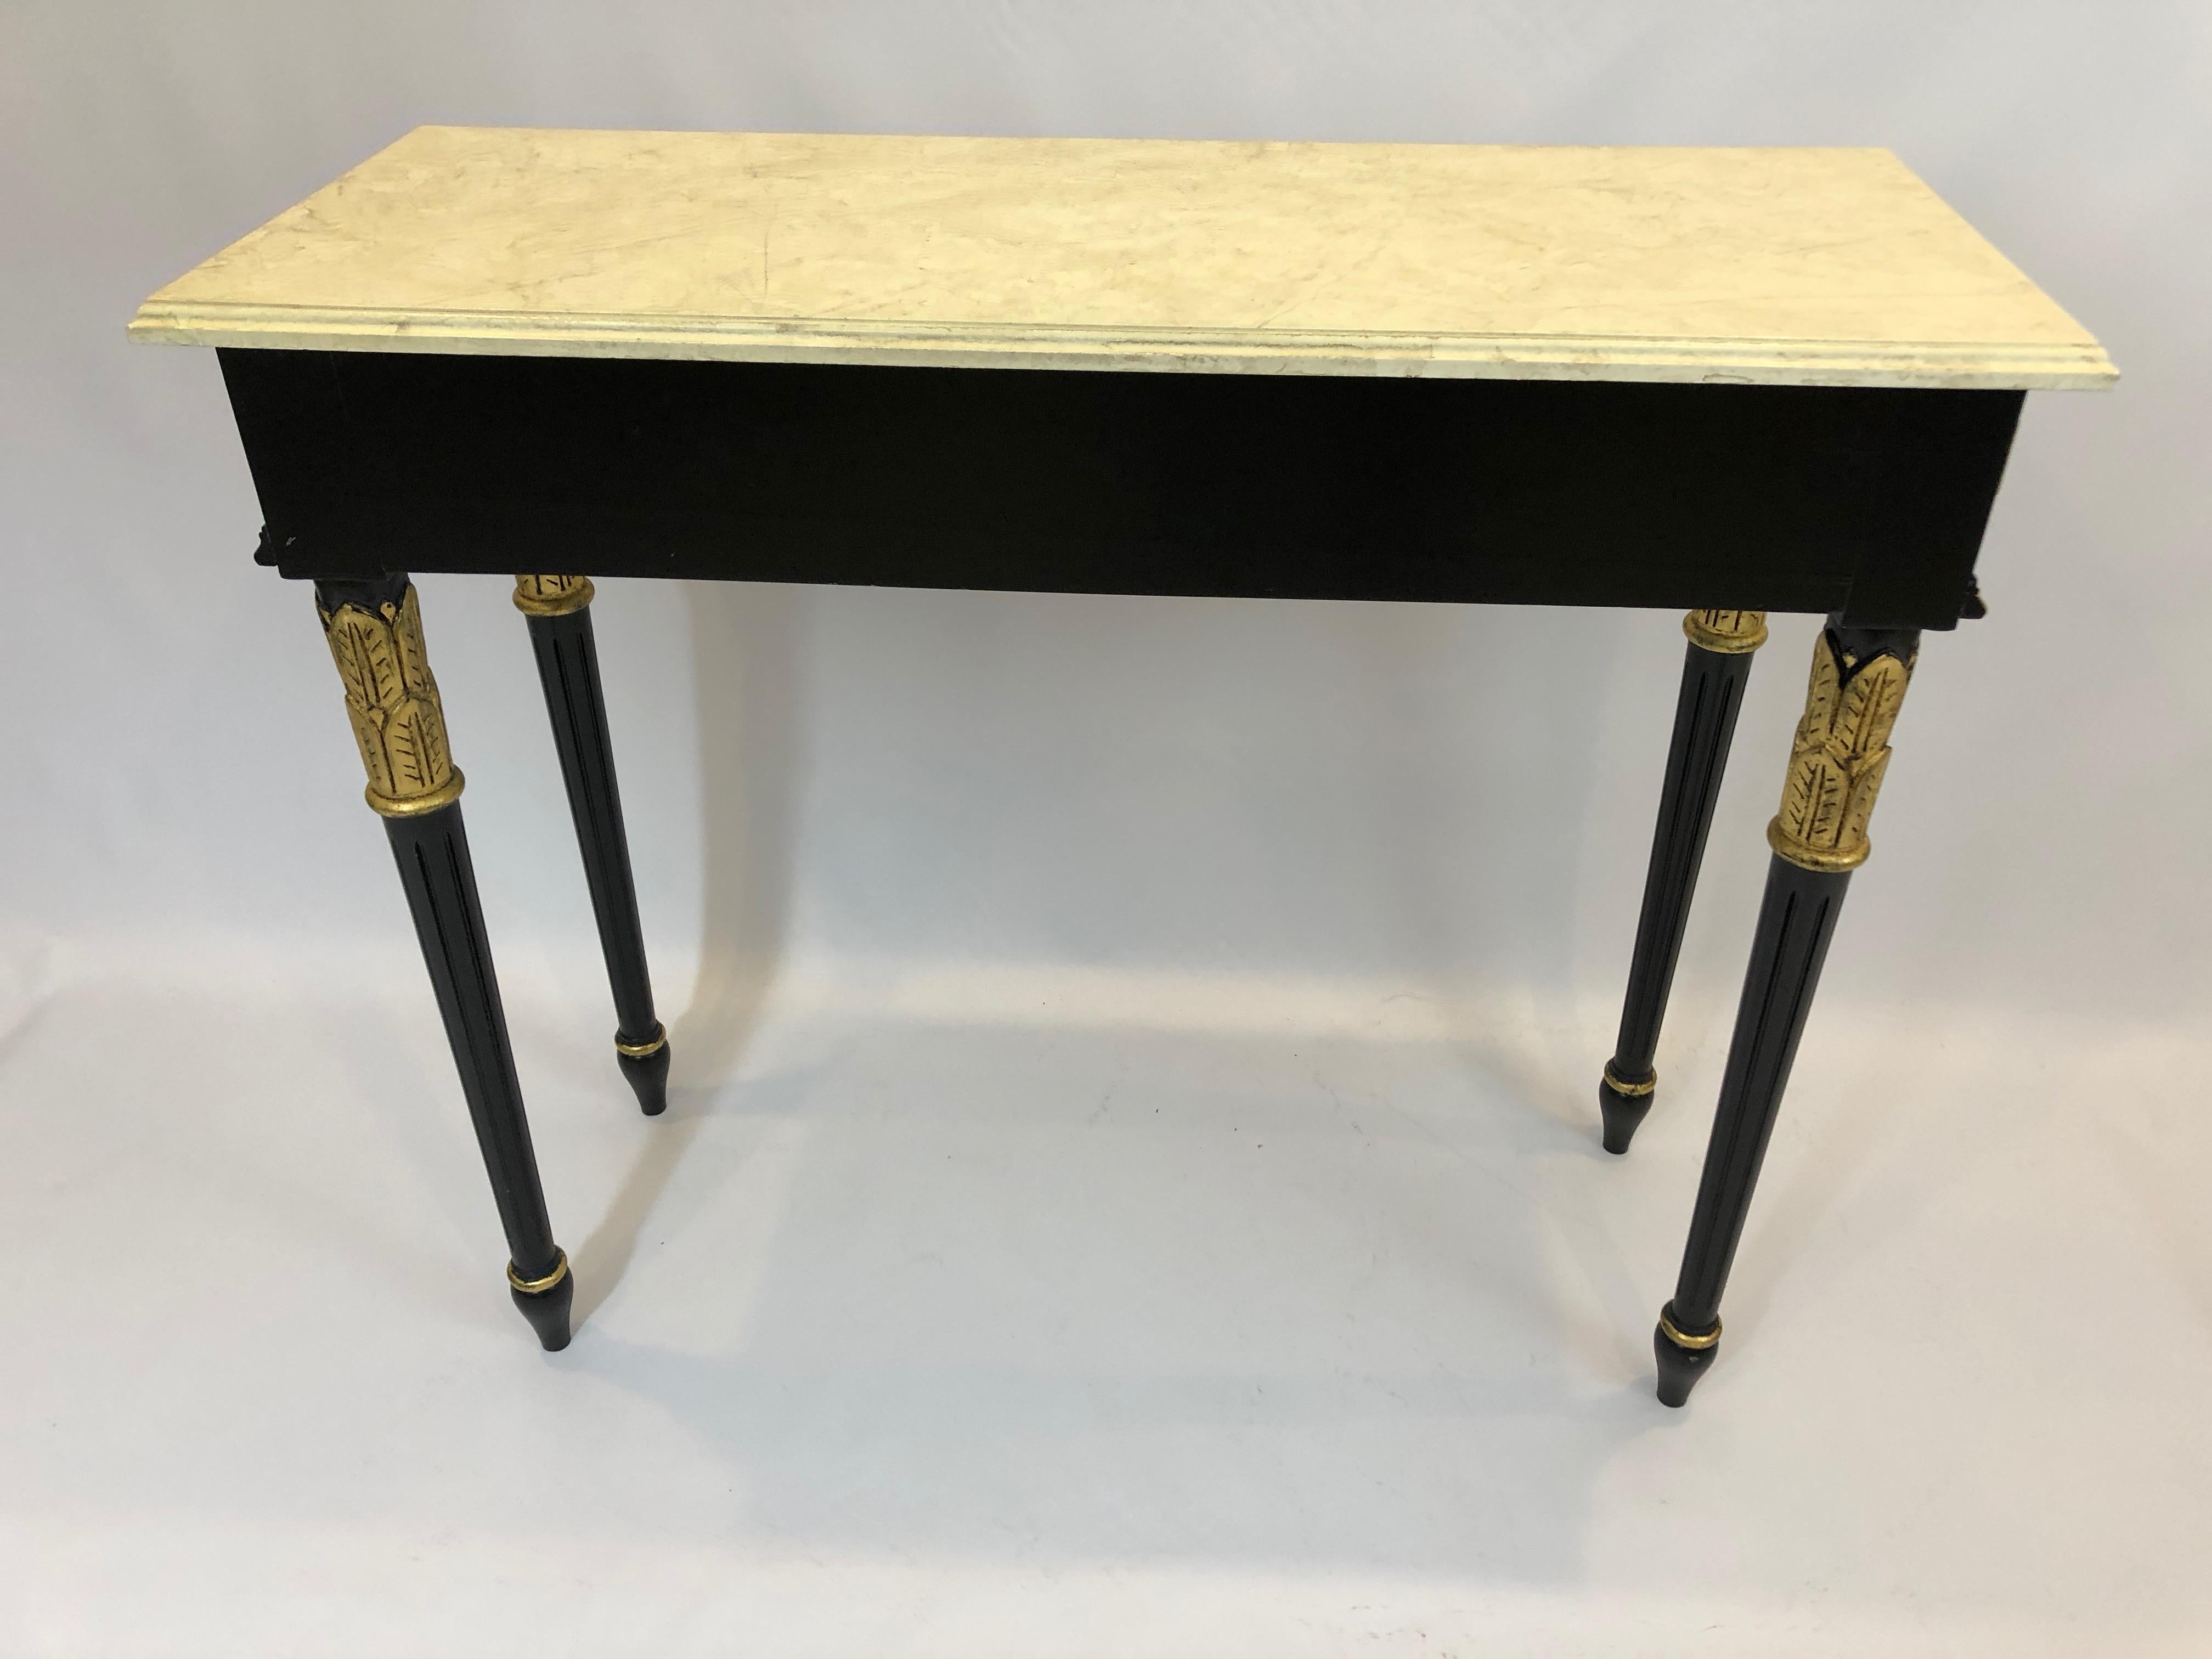 Glamorous Regency Style Black and Gilded Console Table with Faux Marble Top 2